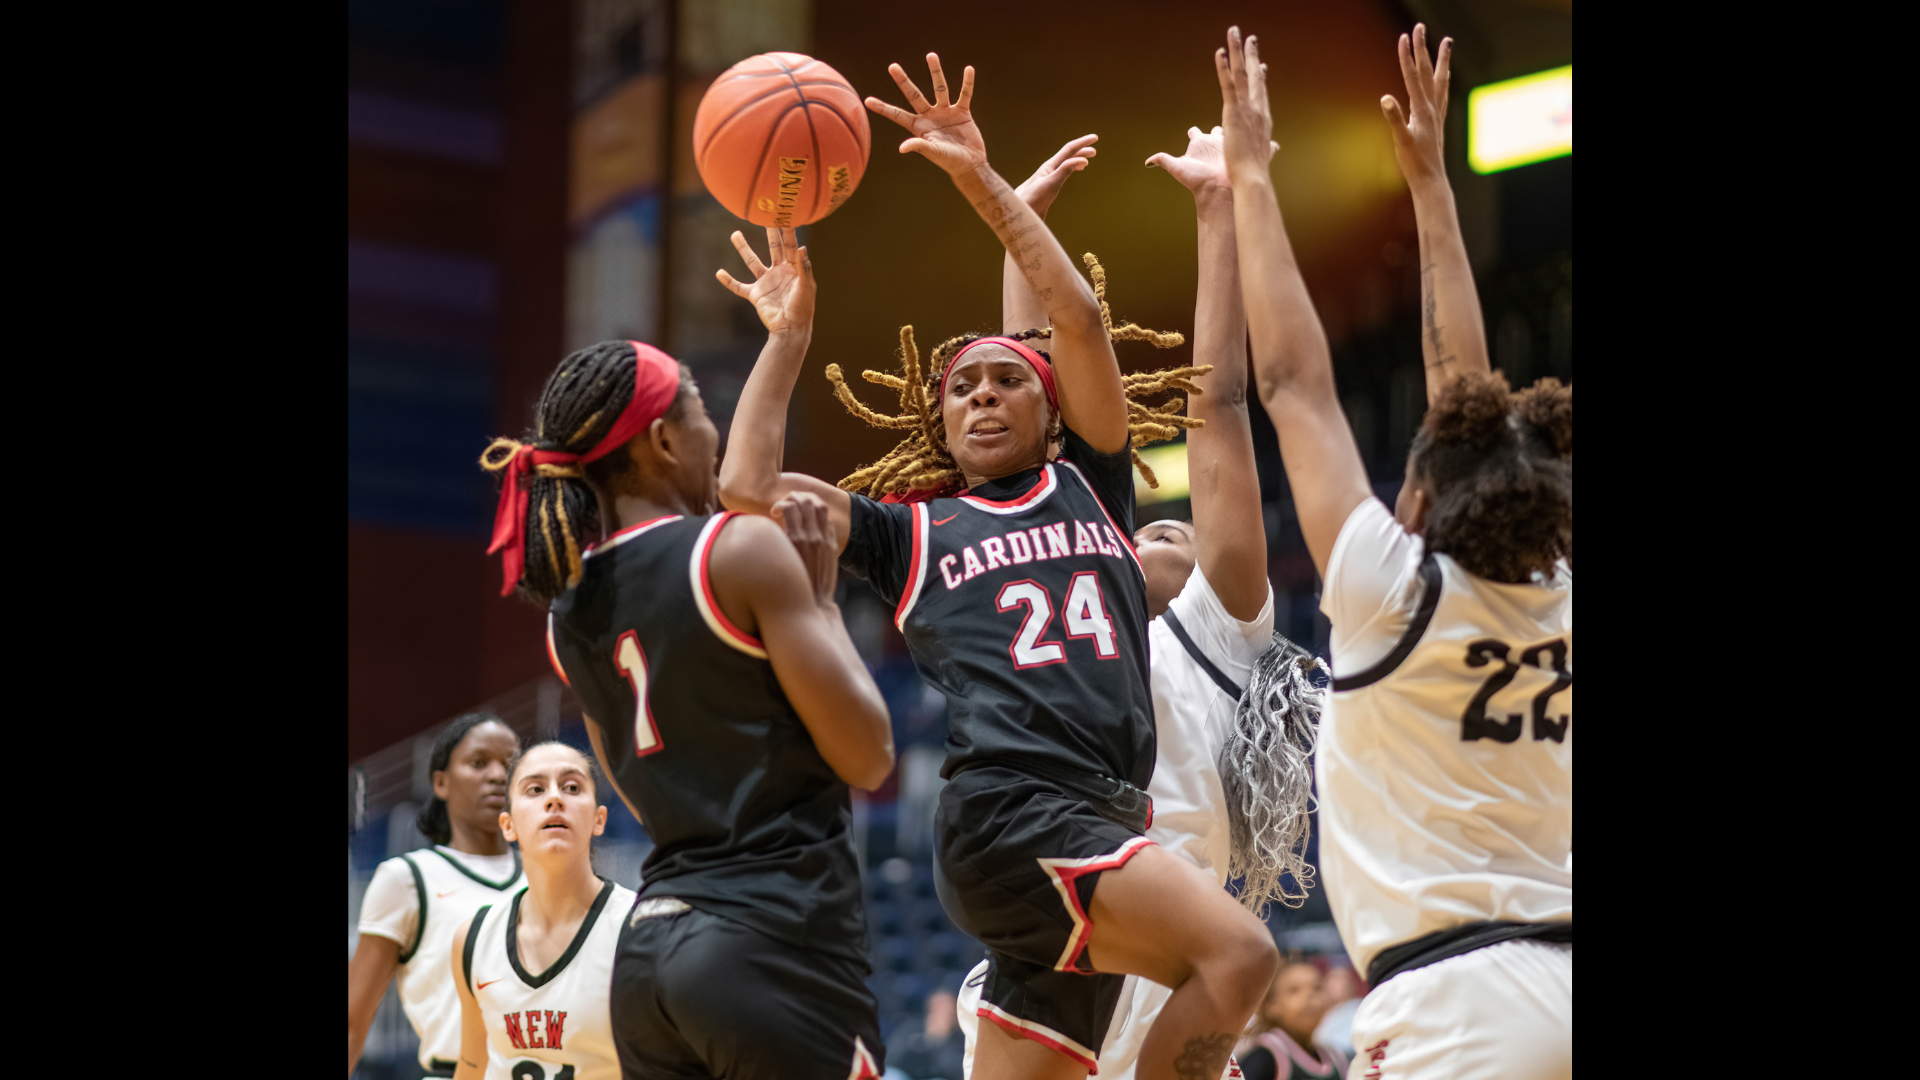 THAT'S A WRAP: Lady Cardinals fall, 74-61